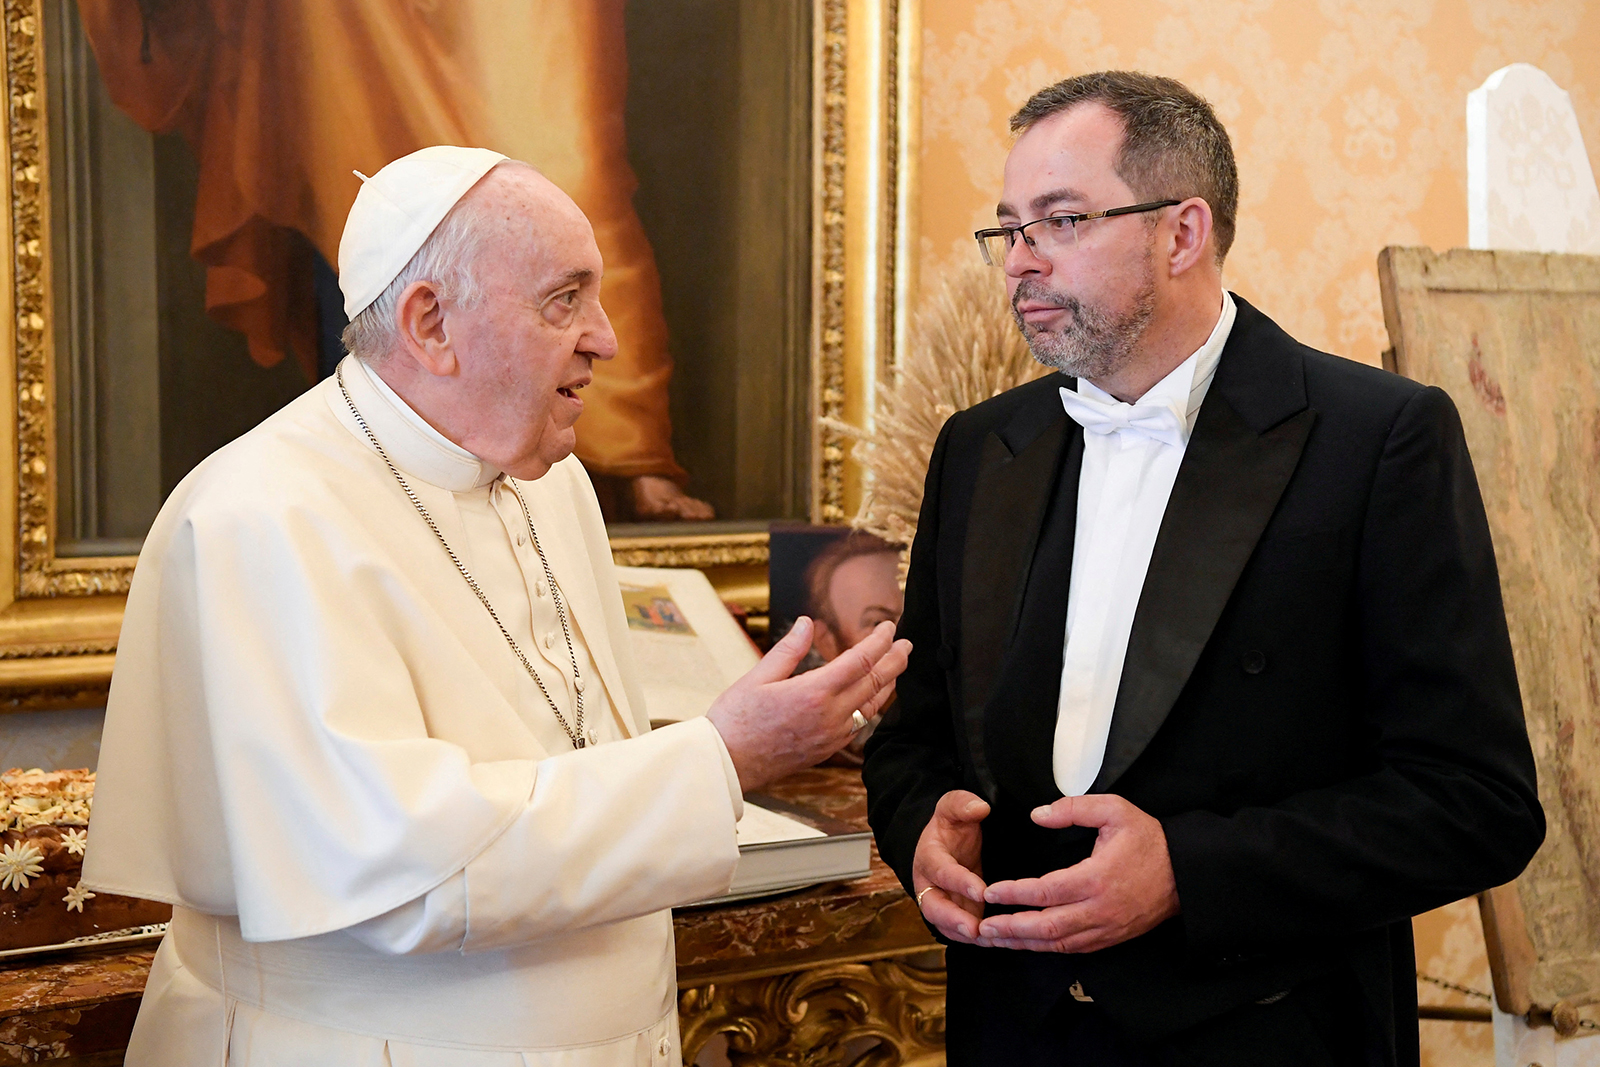 Pope Francis meets with Ukraine's ambassador to the Vatican, Andriy Yurash, during a private audience at the Vatican on April 7.